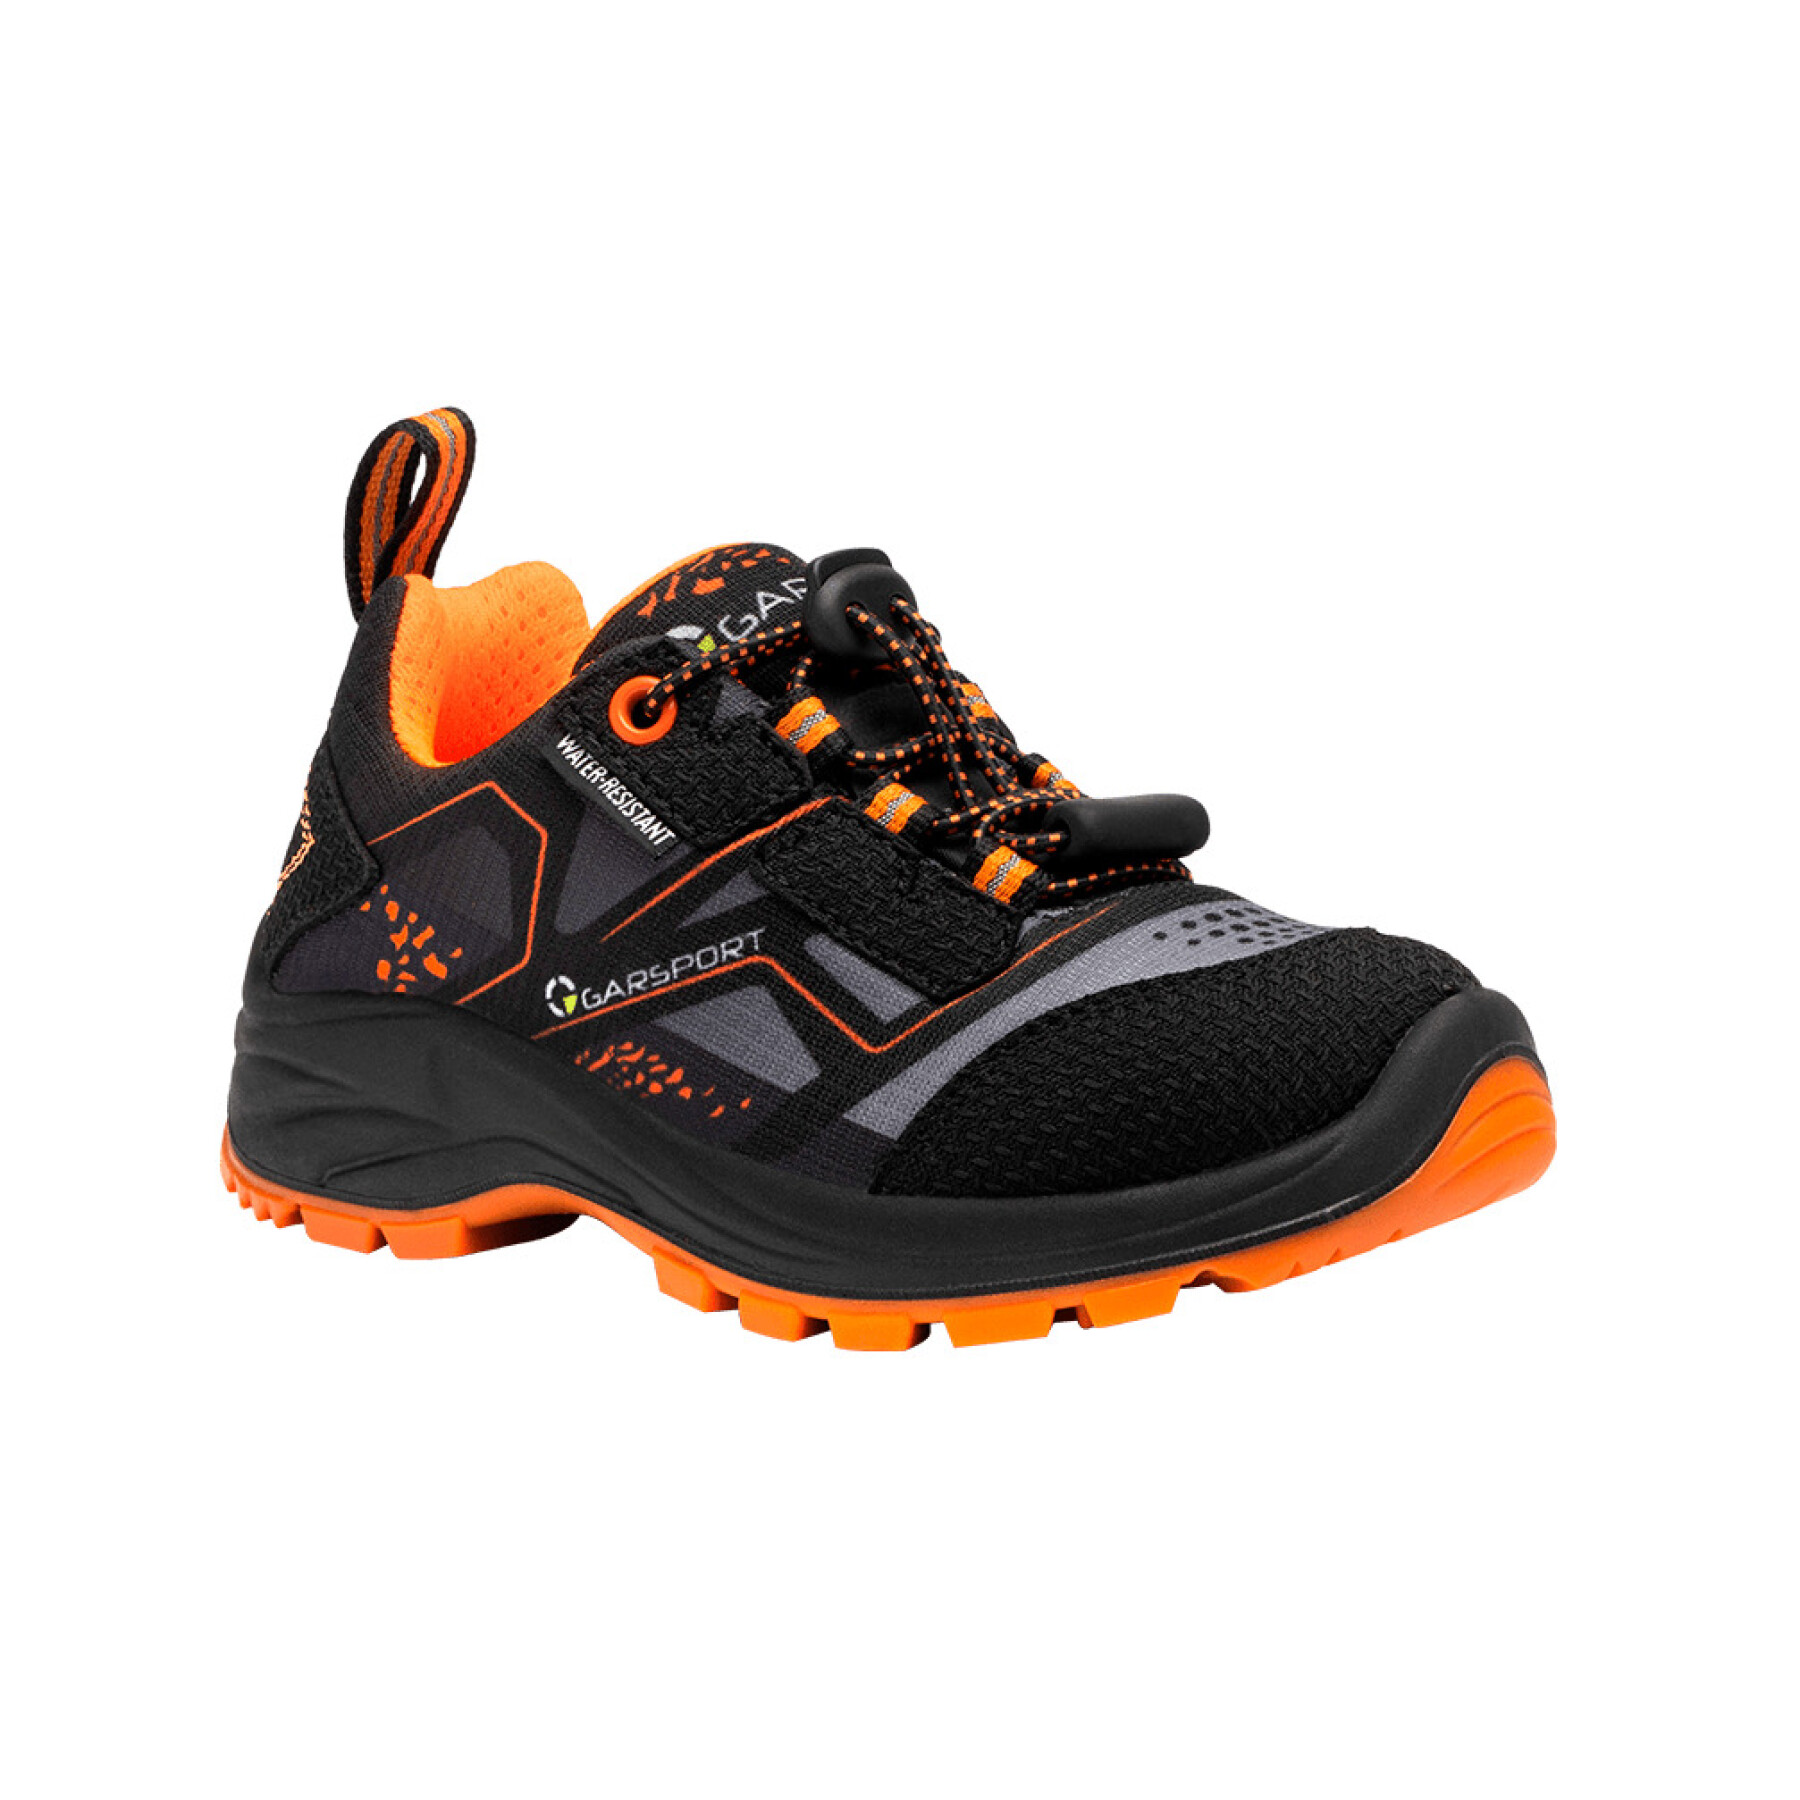 Baby hiking shoes Garsport Iena Low WR